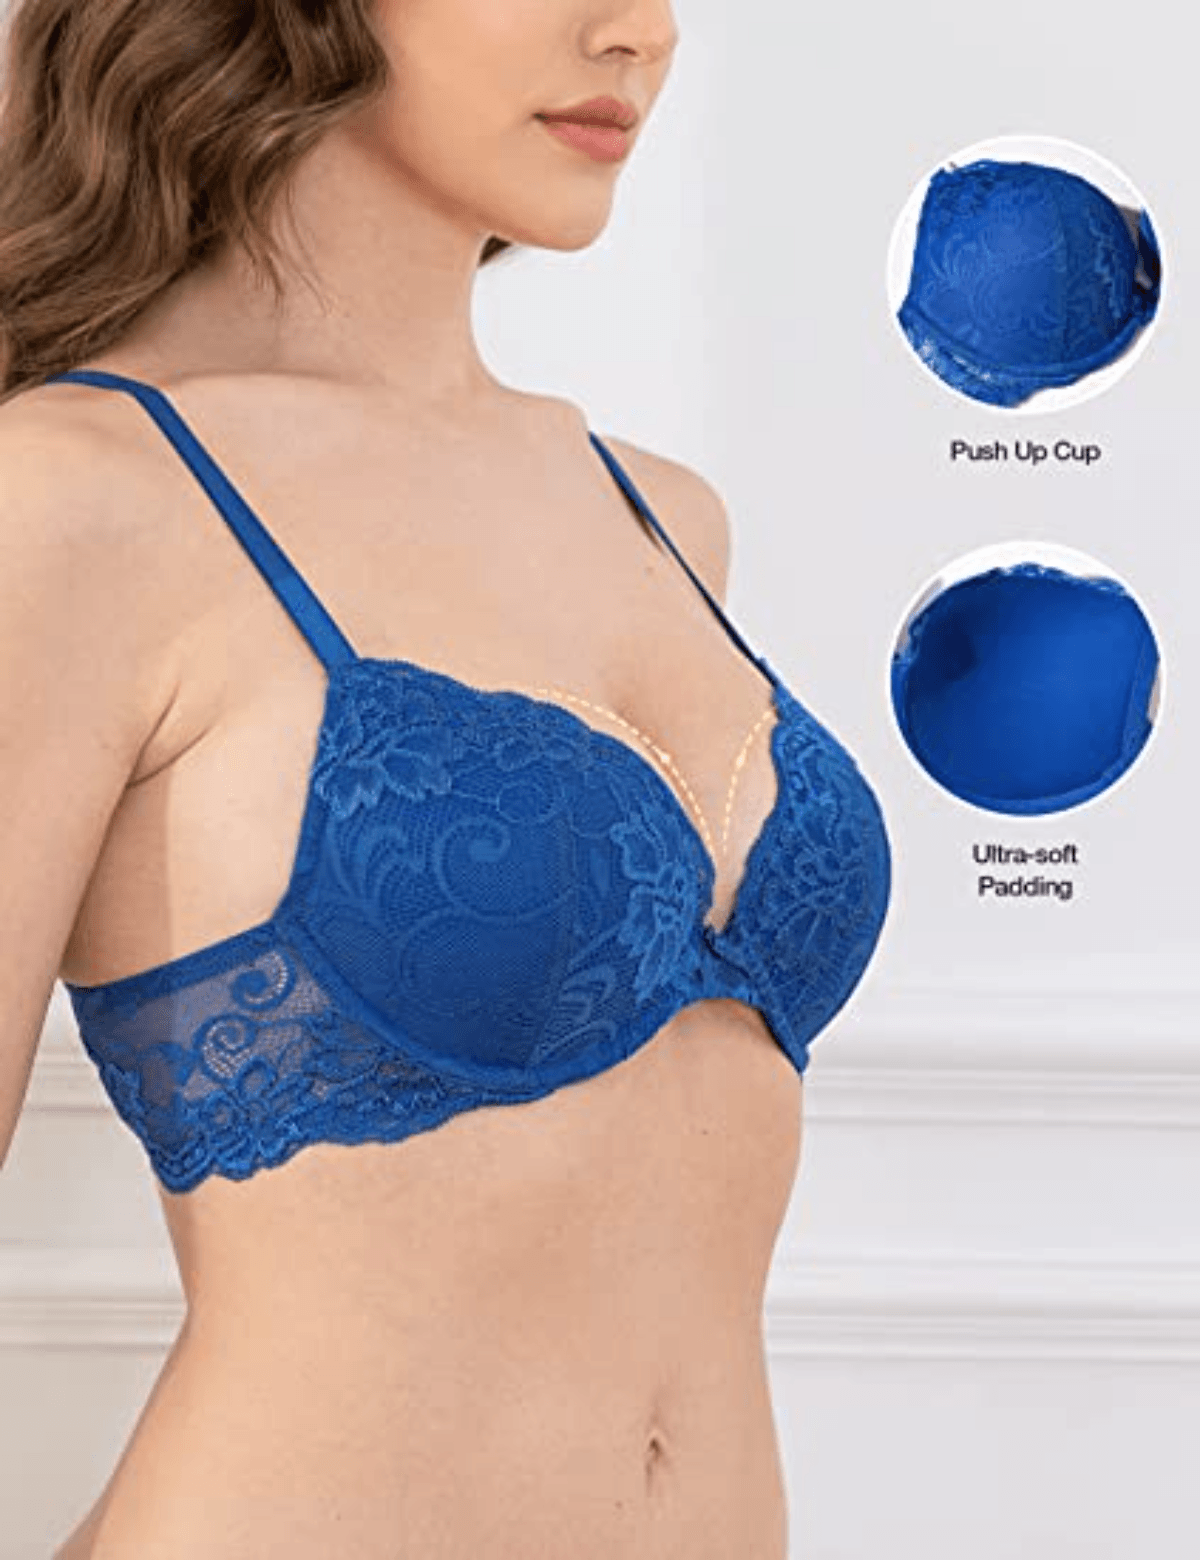 Shyle 40b Royal Blue Push Up Bra - Get Best Price from